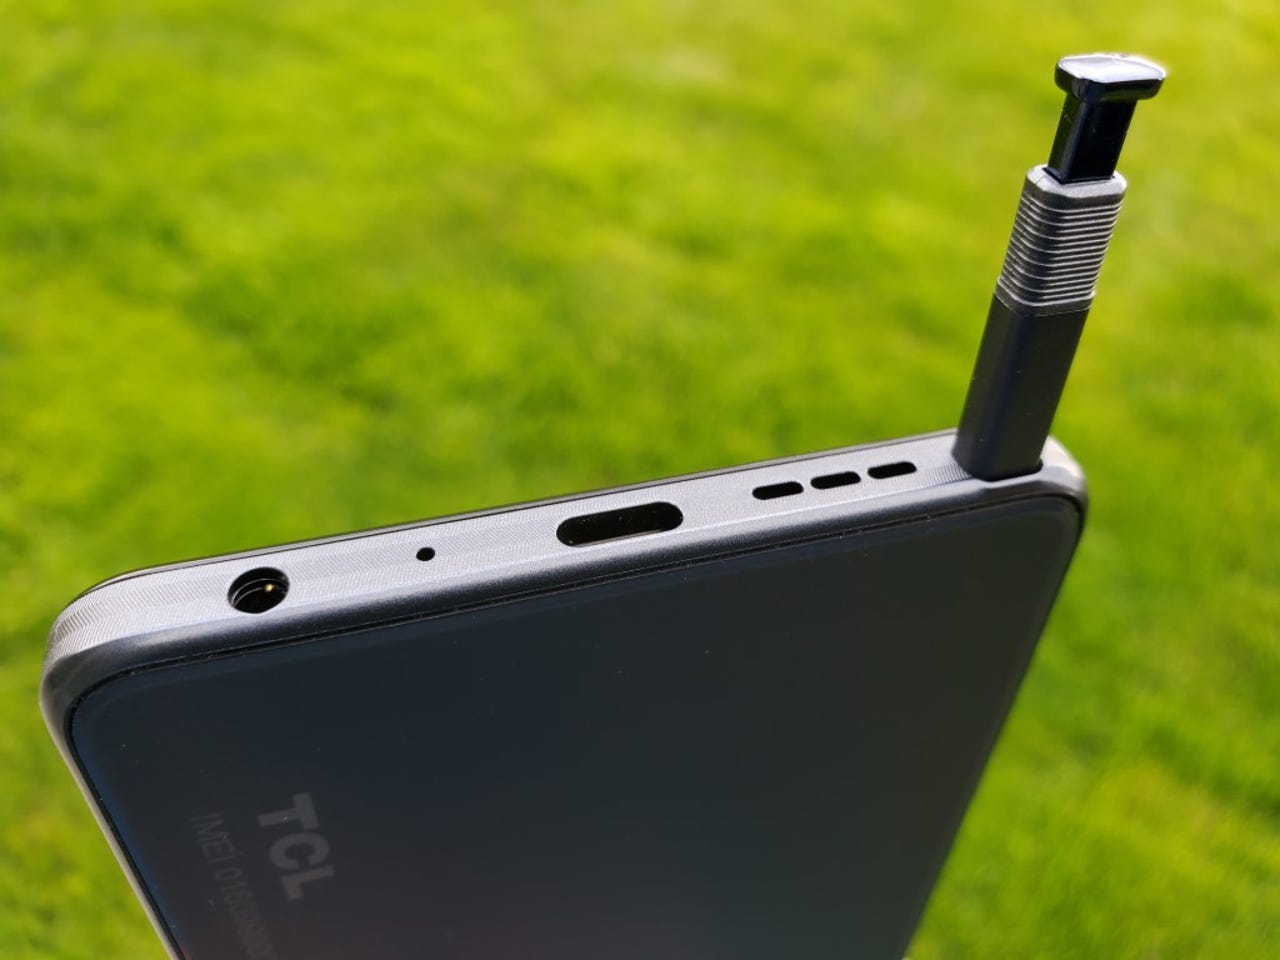 TCL Stylus 5G review: A solid sub-$300 stylus phone